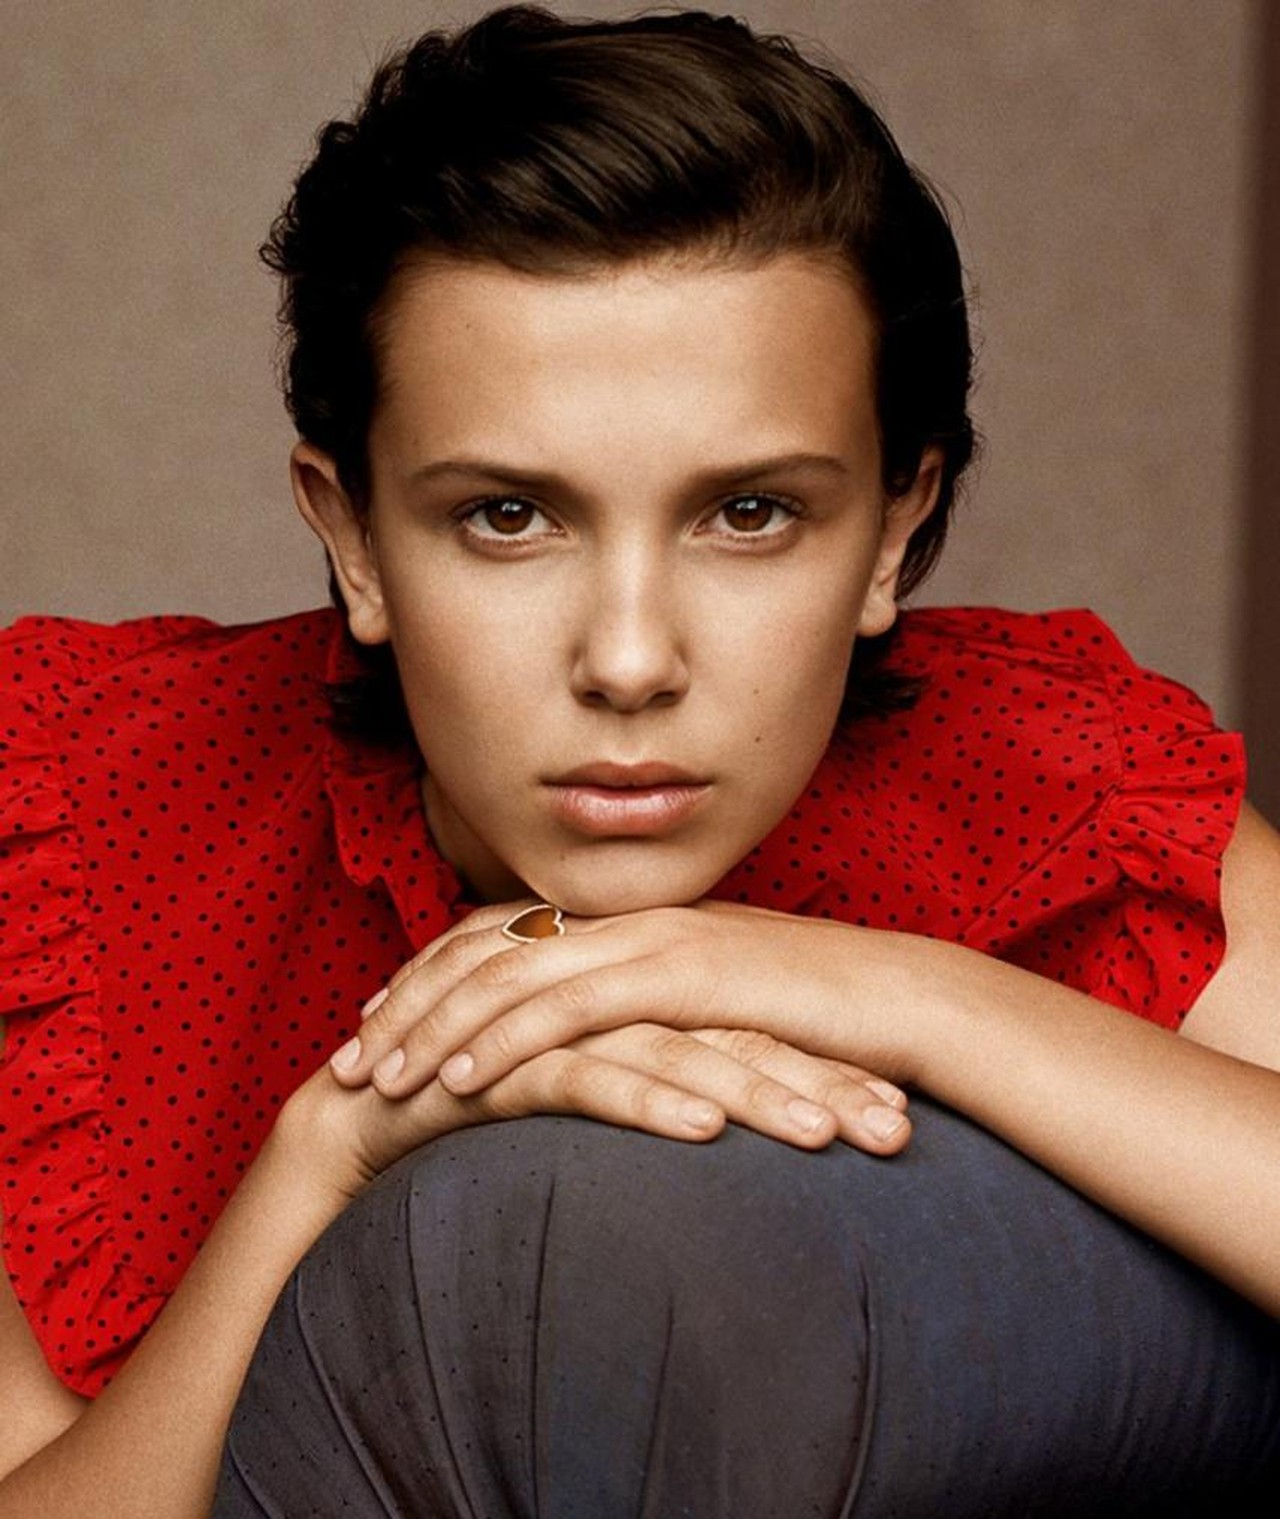 Millie Bobby Brown Actress 2021 Wallpapers